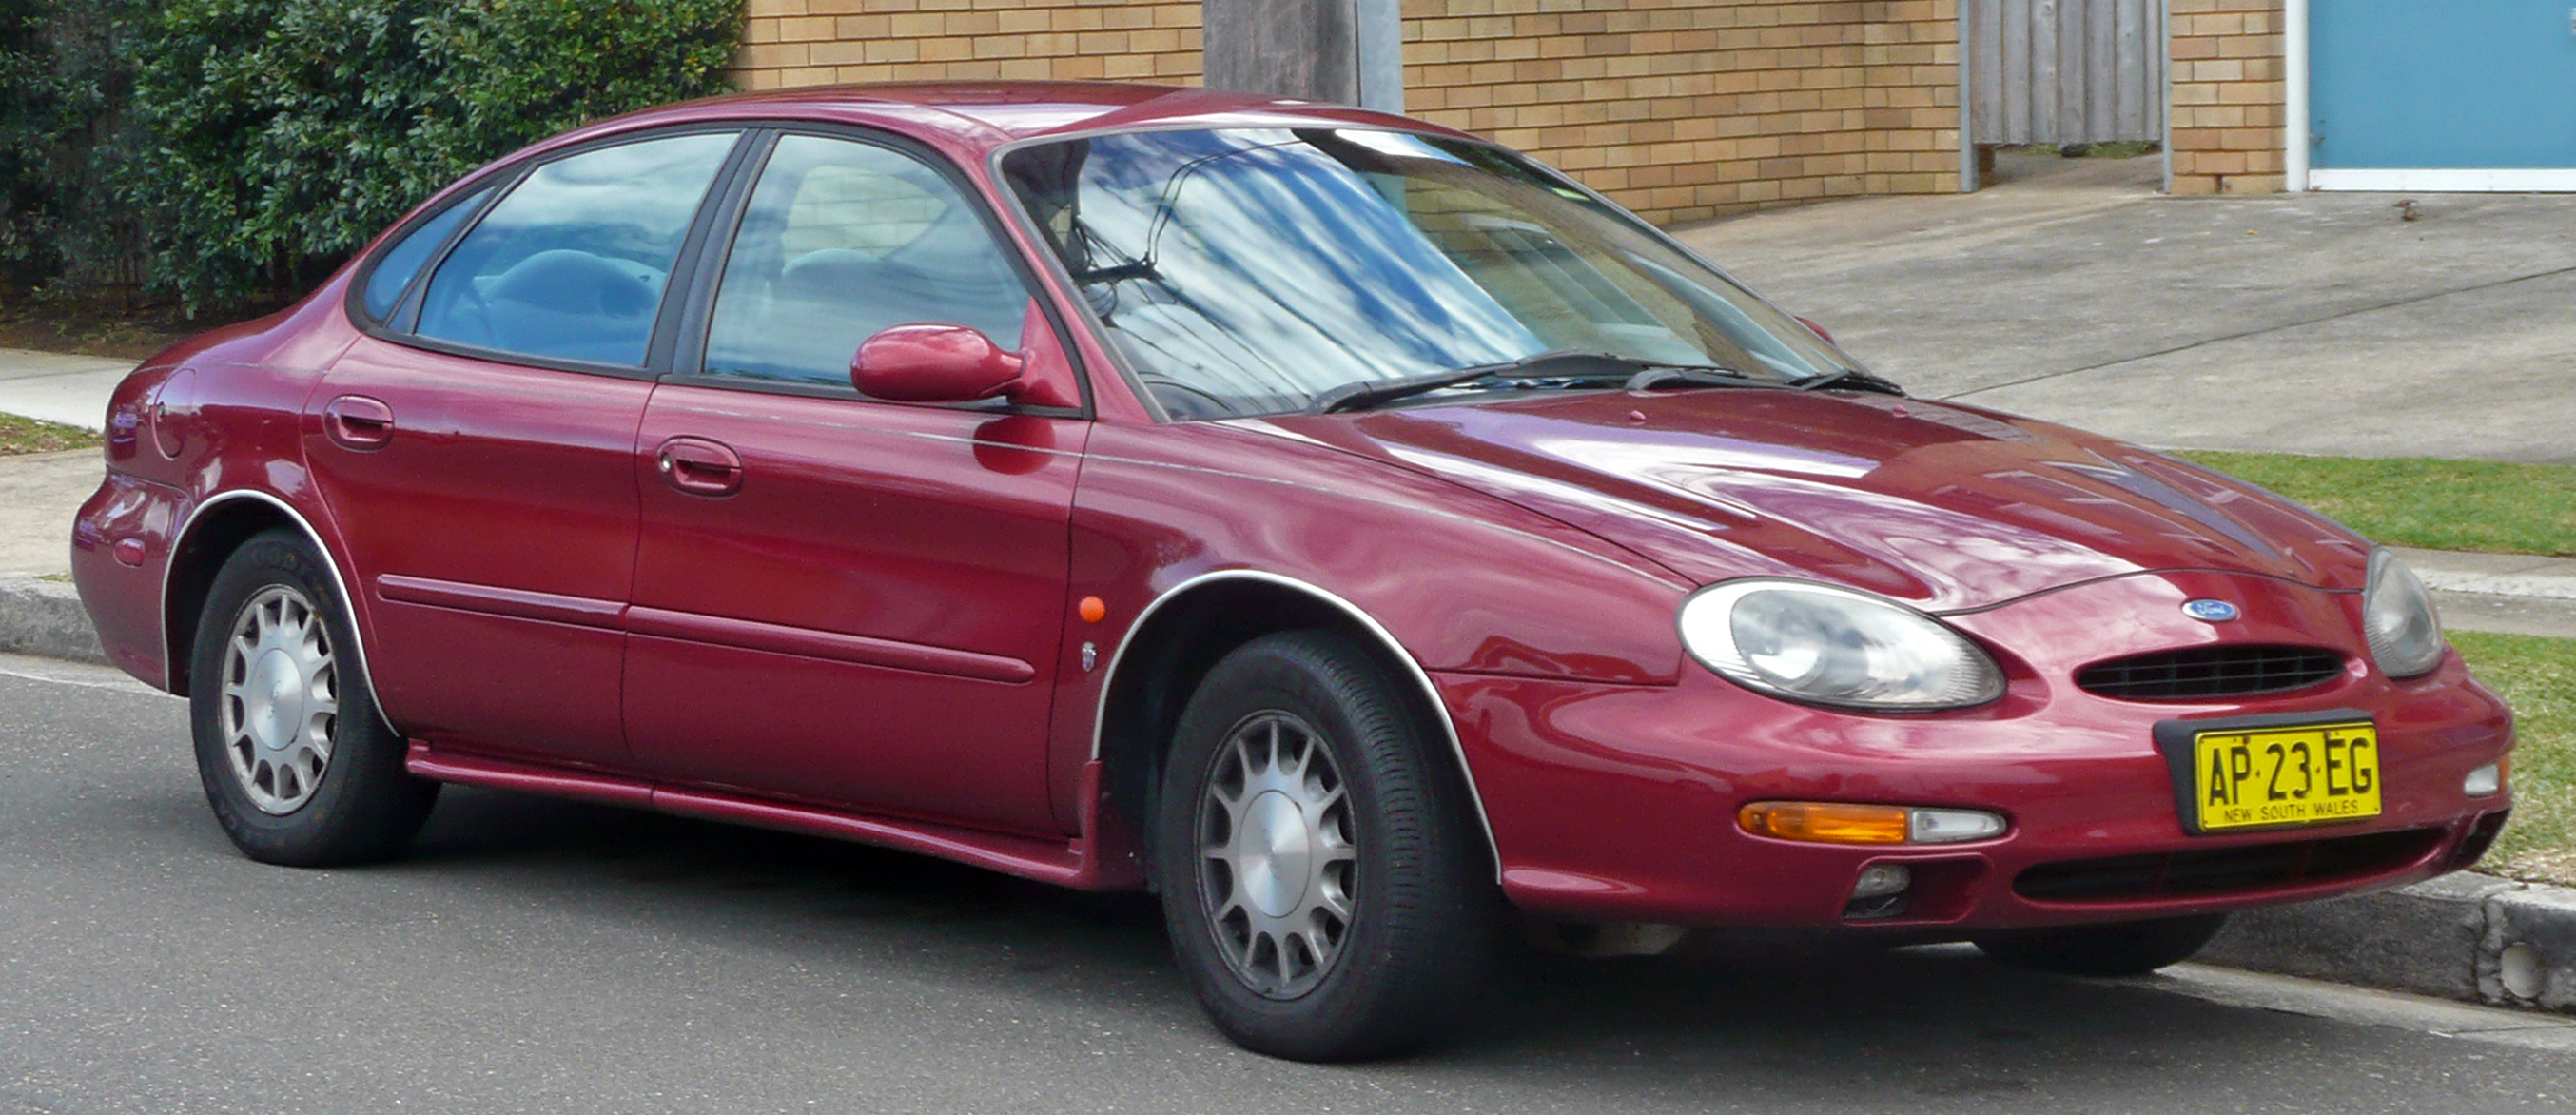 1996 Ford Taurus Information And Photos Momentcar